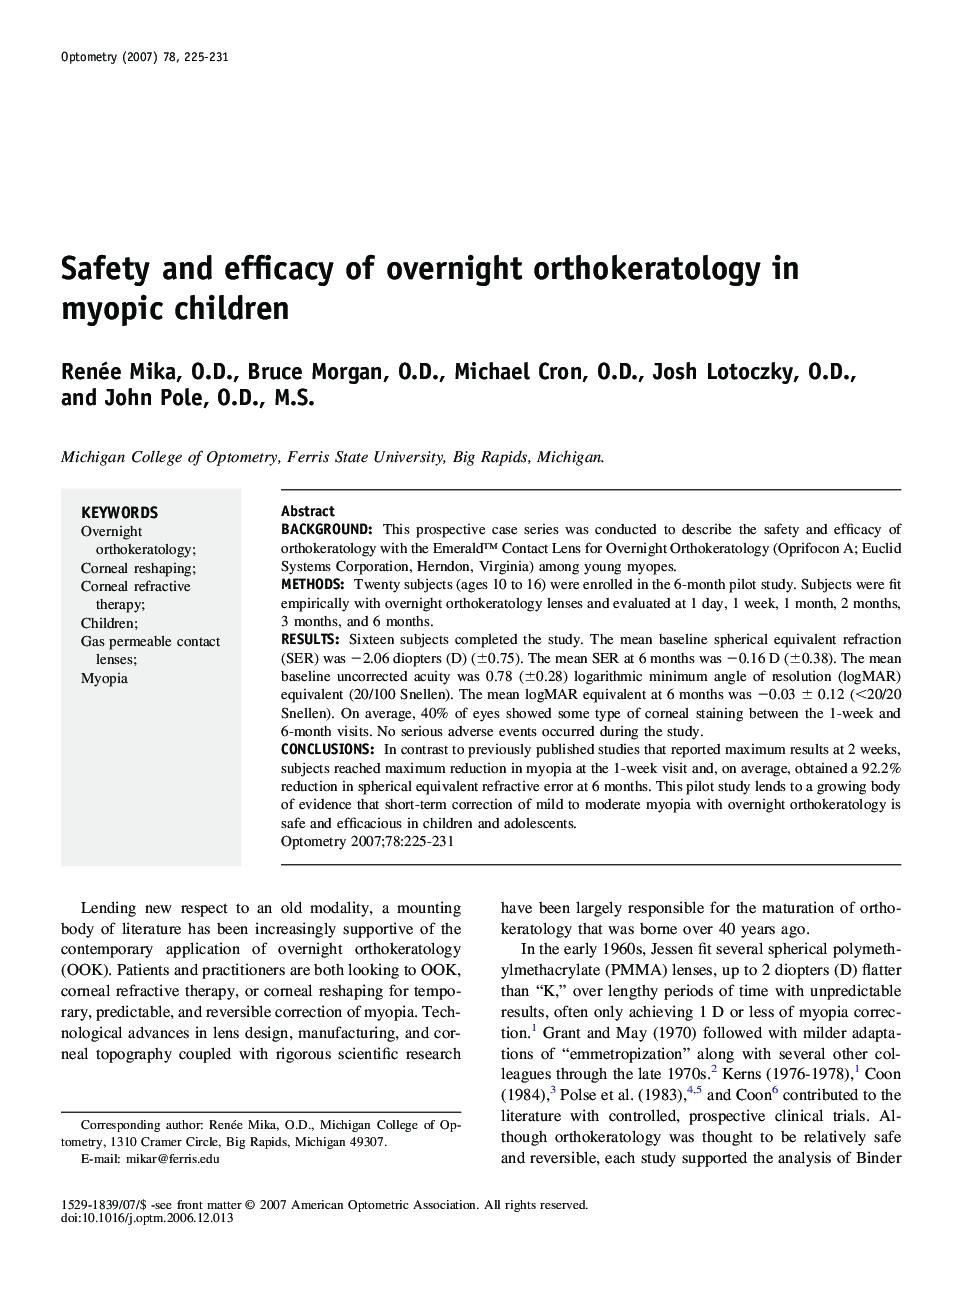 Safety and efficacy of overnight orthokeratology in myopic children